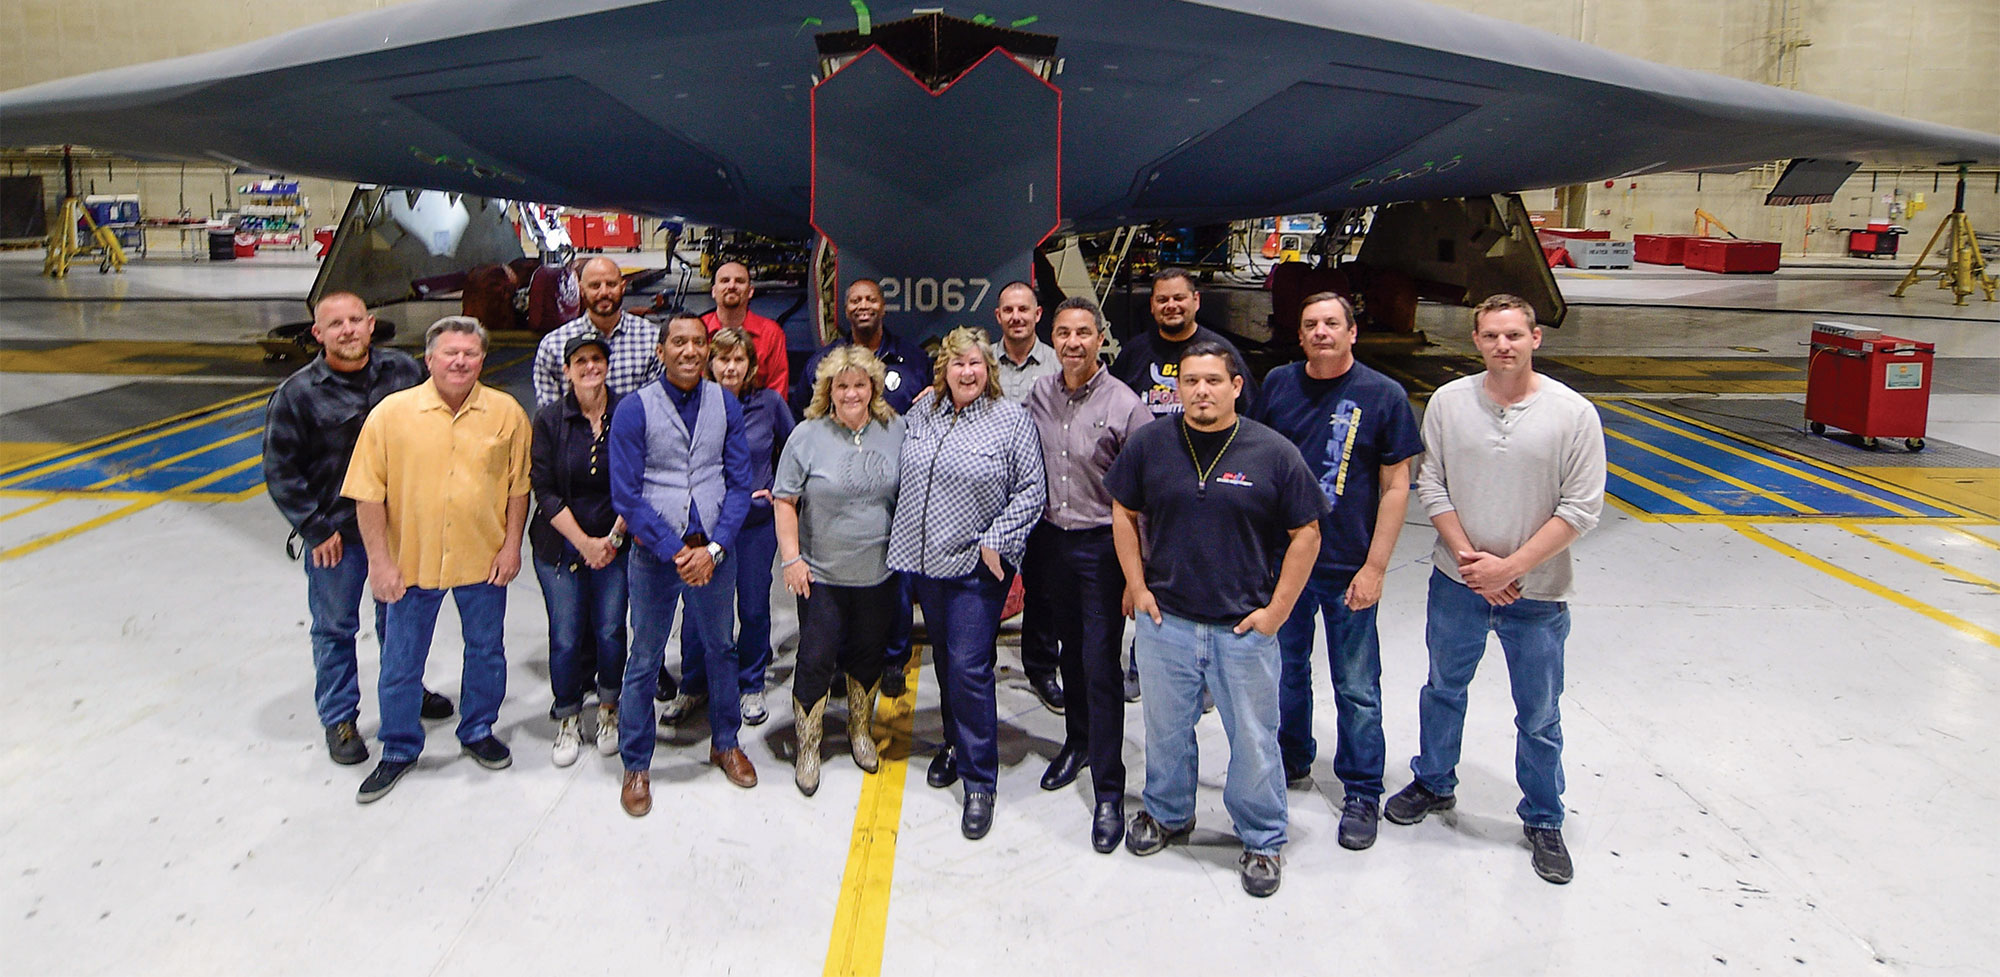 Group of employees standing in front of large aircraft.